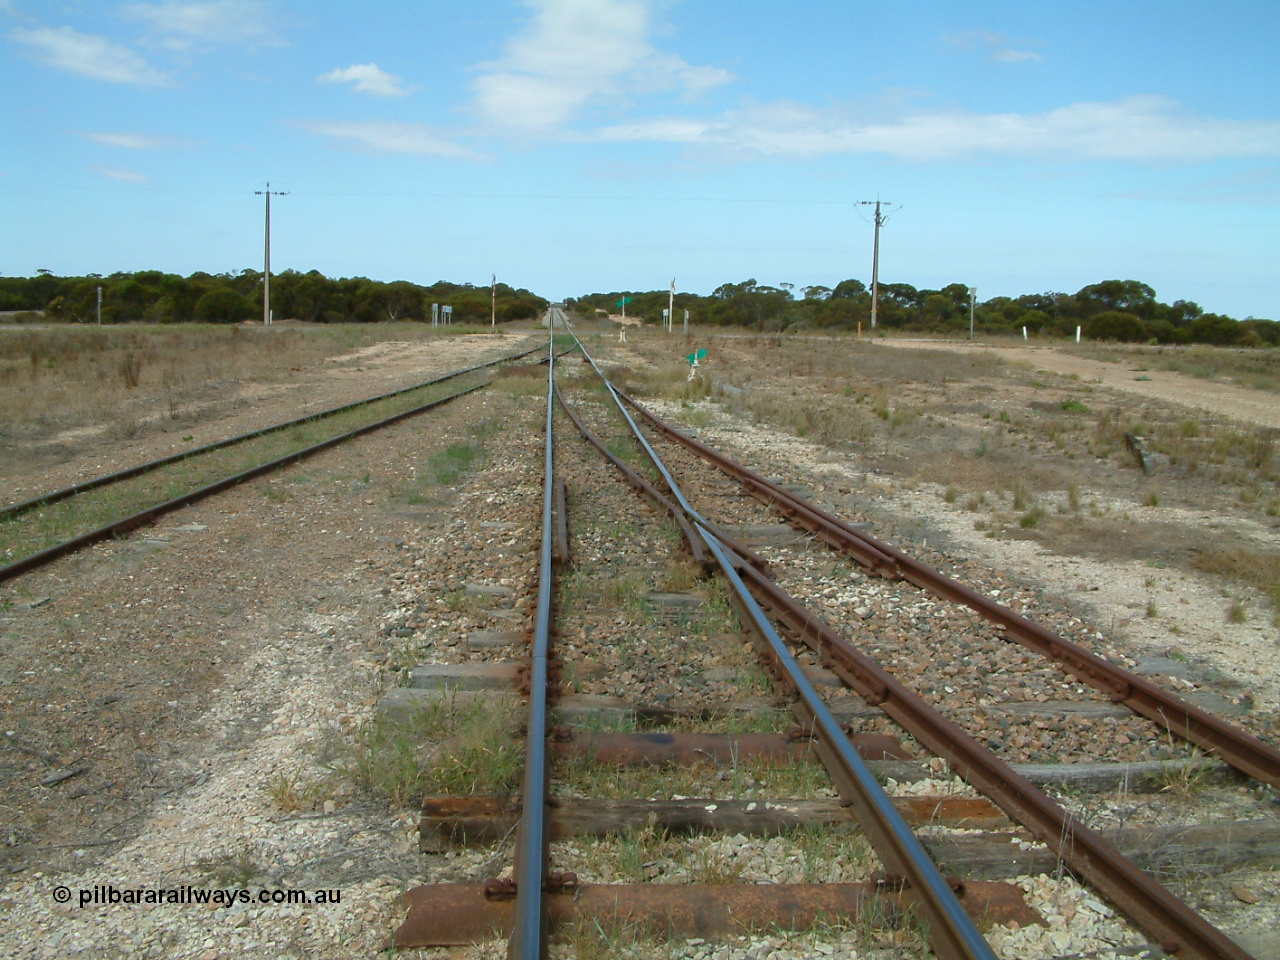 030409 125102
Rudall, view looking south from the south end, the goods and grain loop coming in from the left with the stub siding (former station loop) on the right.
